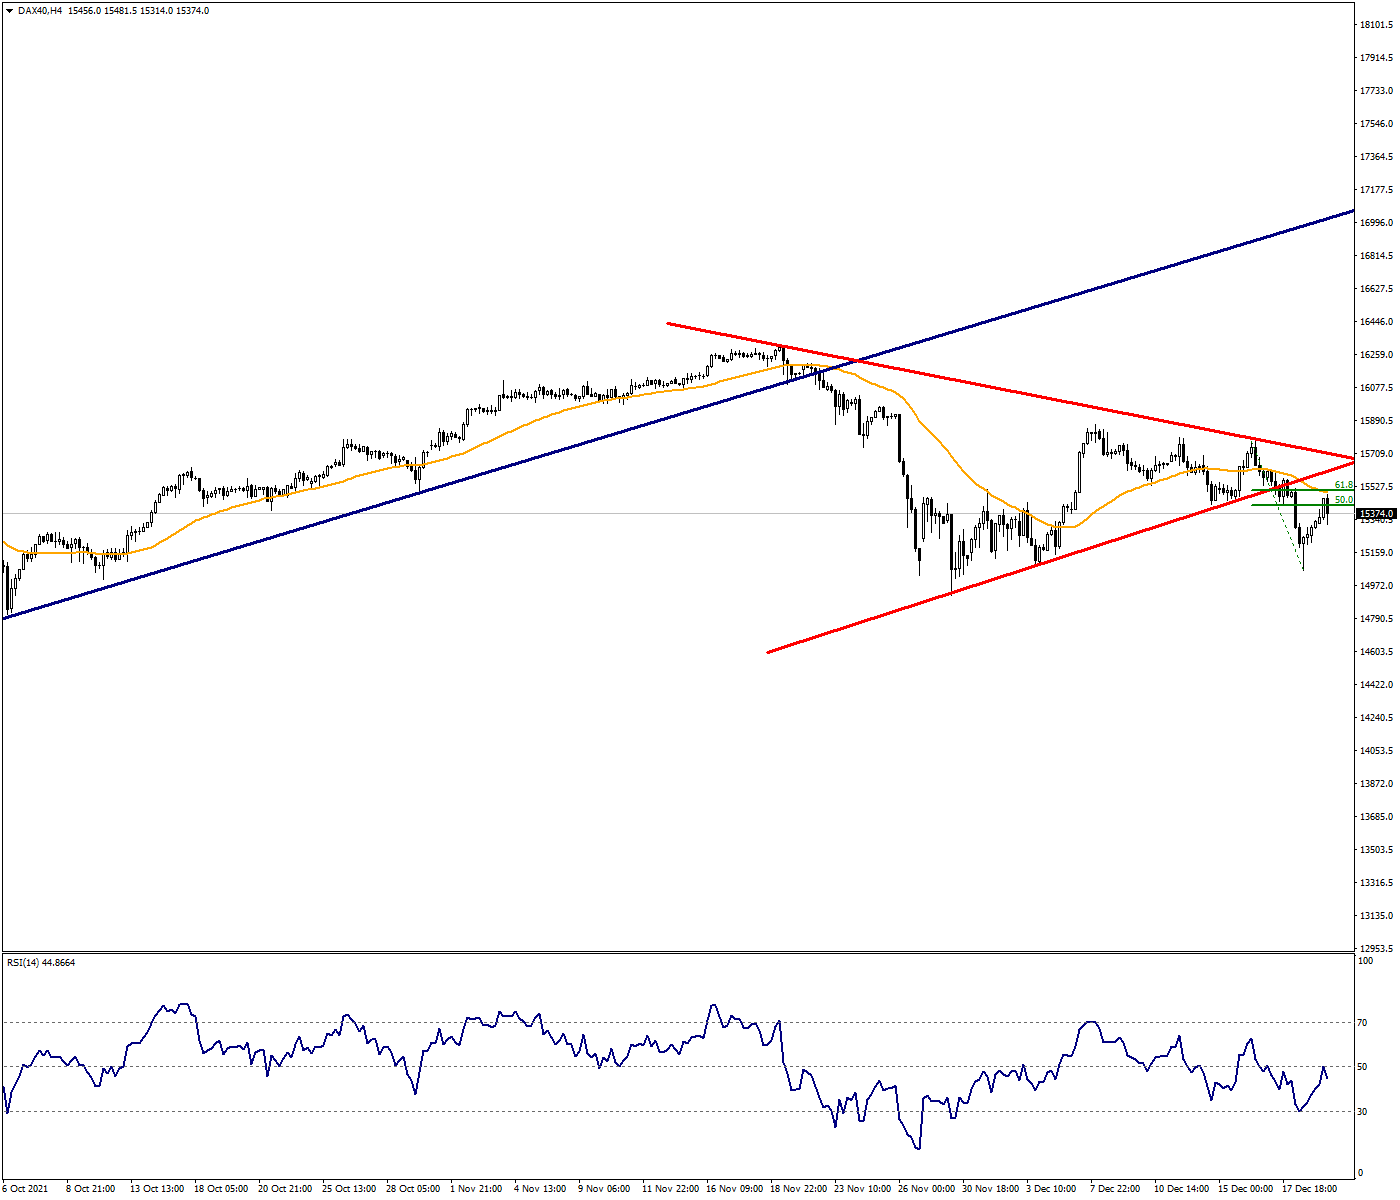 DAX40 could lose further